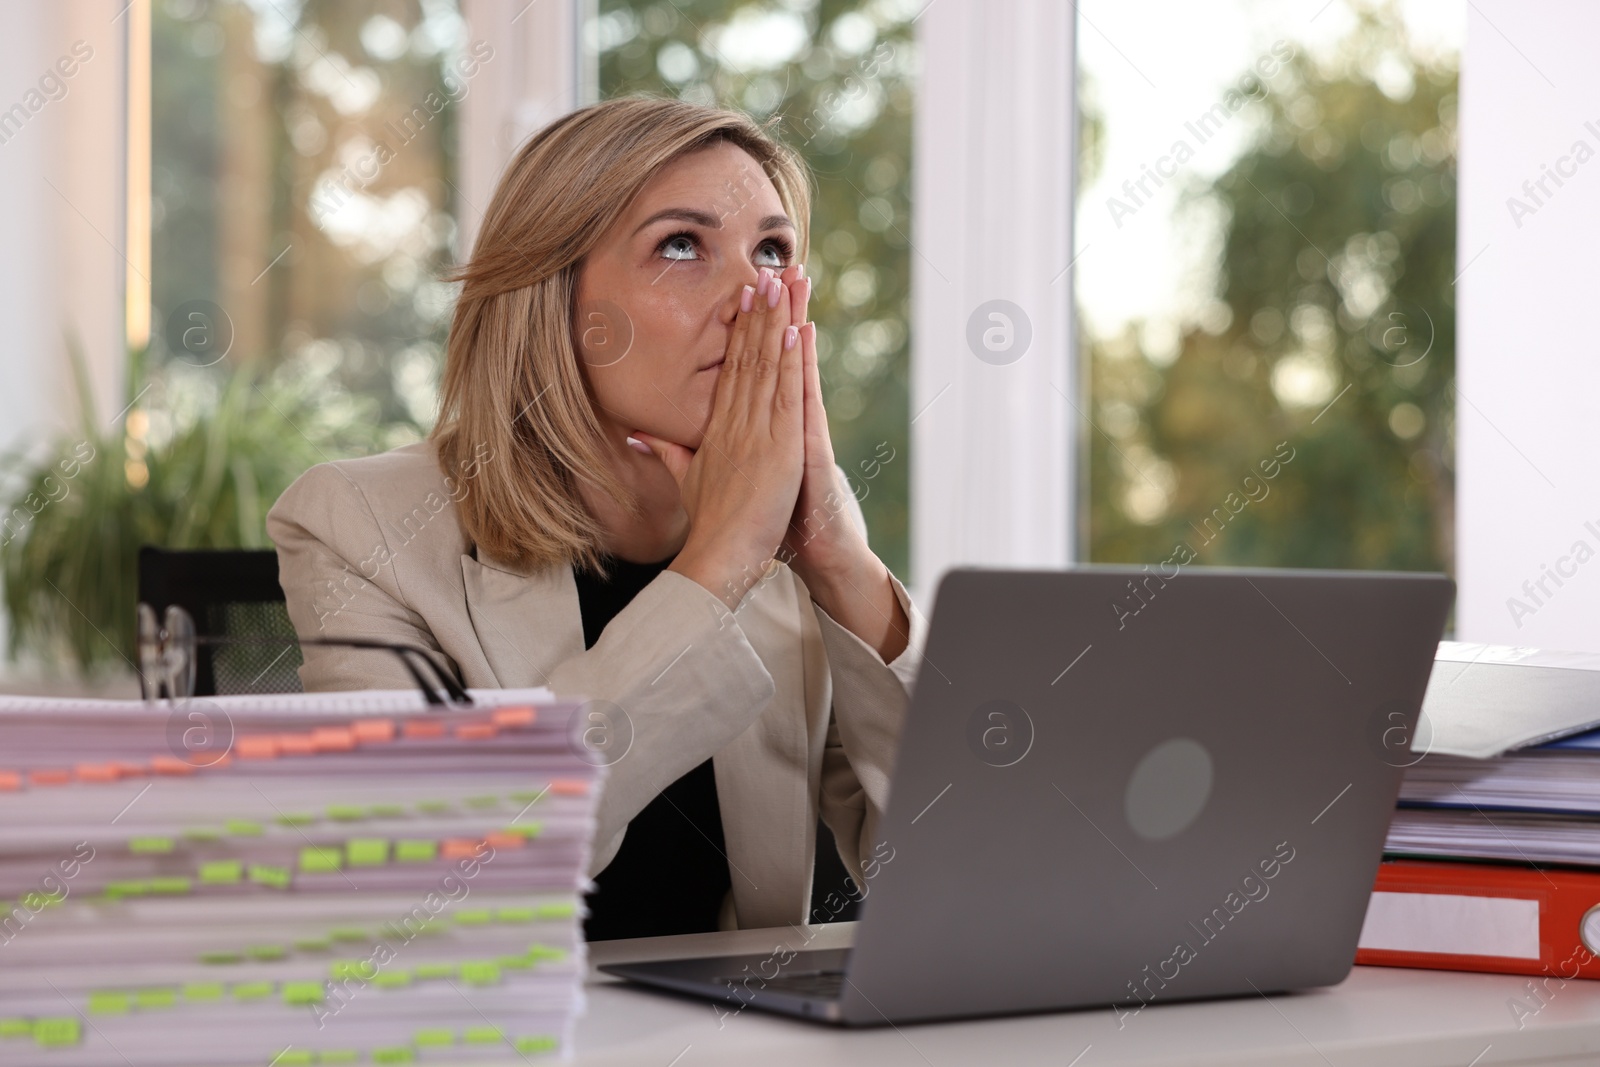 Photo of Overwhelmed woman sitting at table with stacks of documents and folders in office